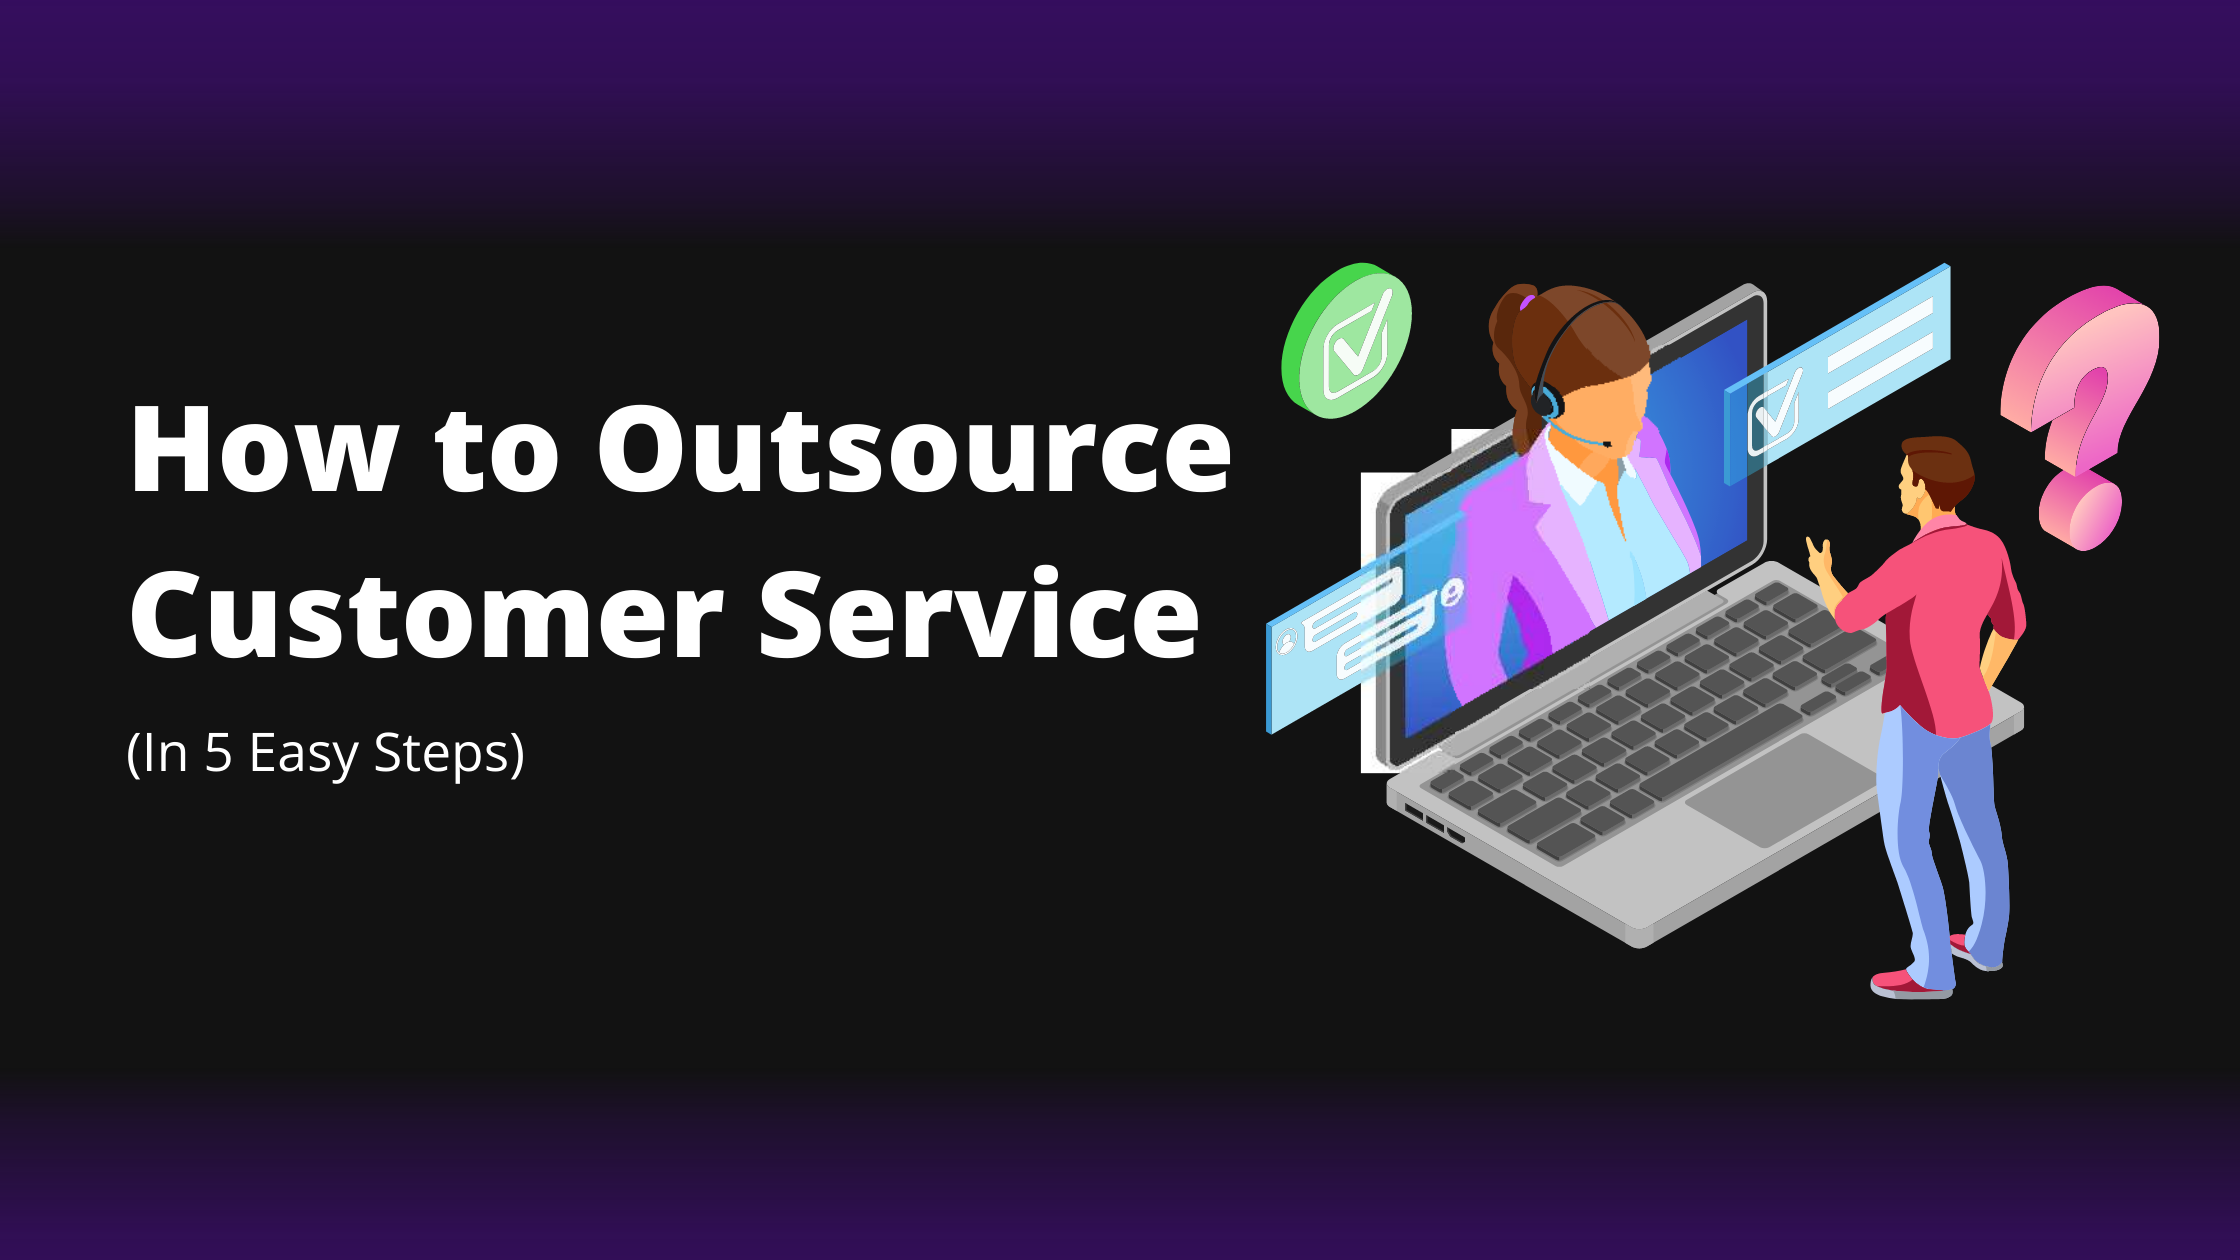 How to Outsource Customer Service in 2023 (5 easy steps)